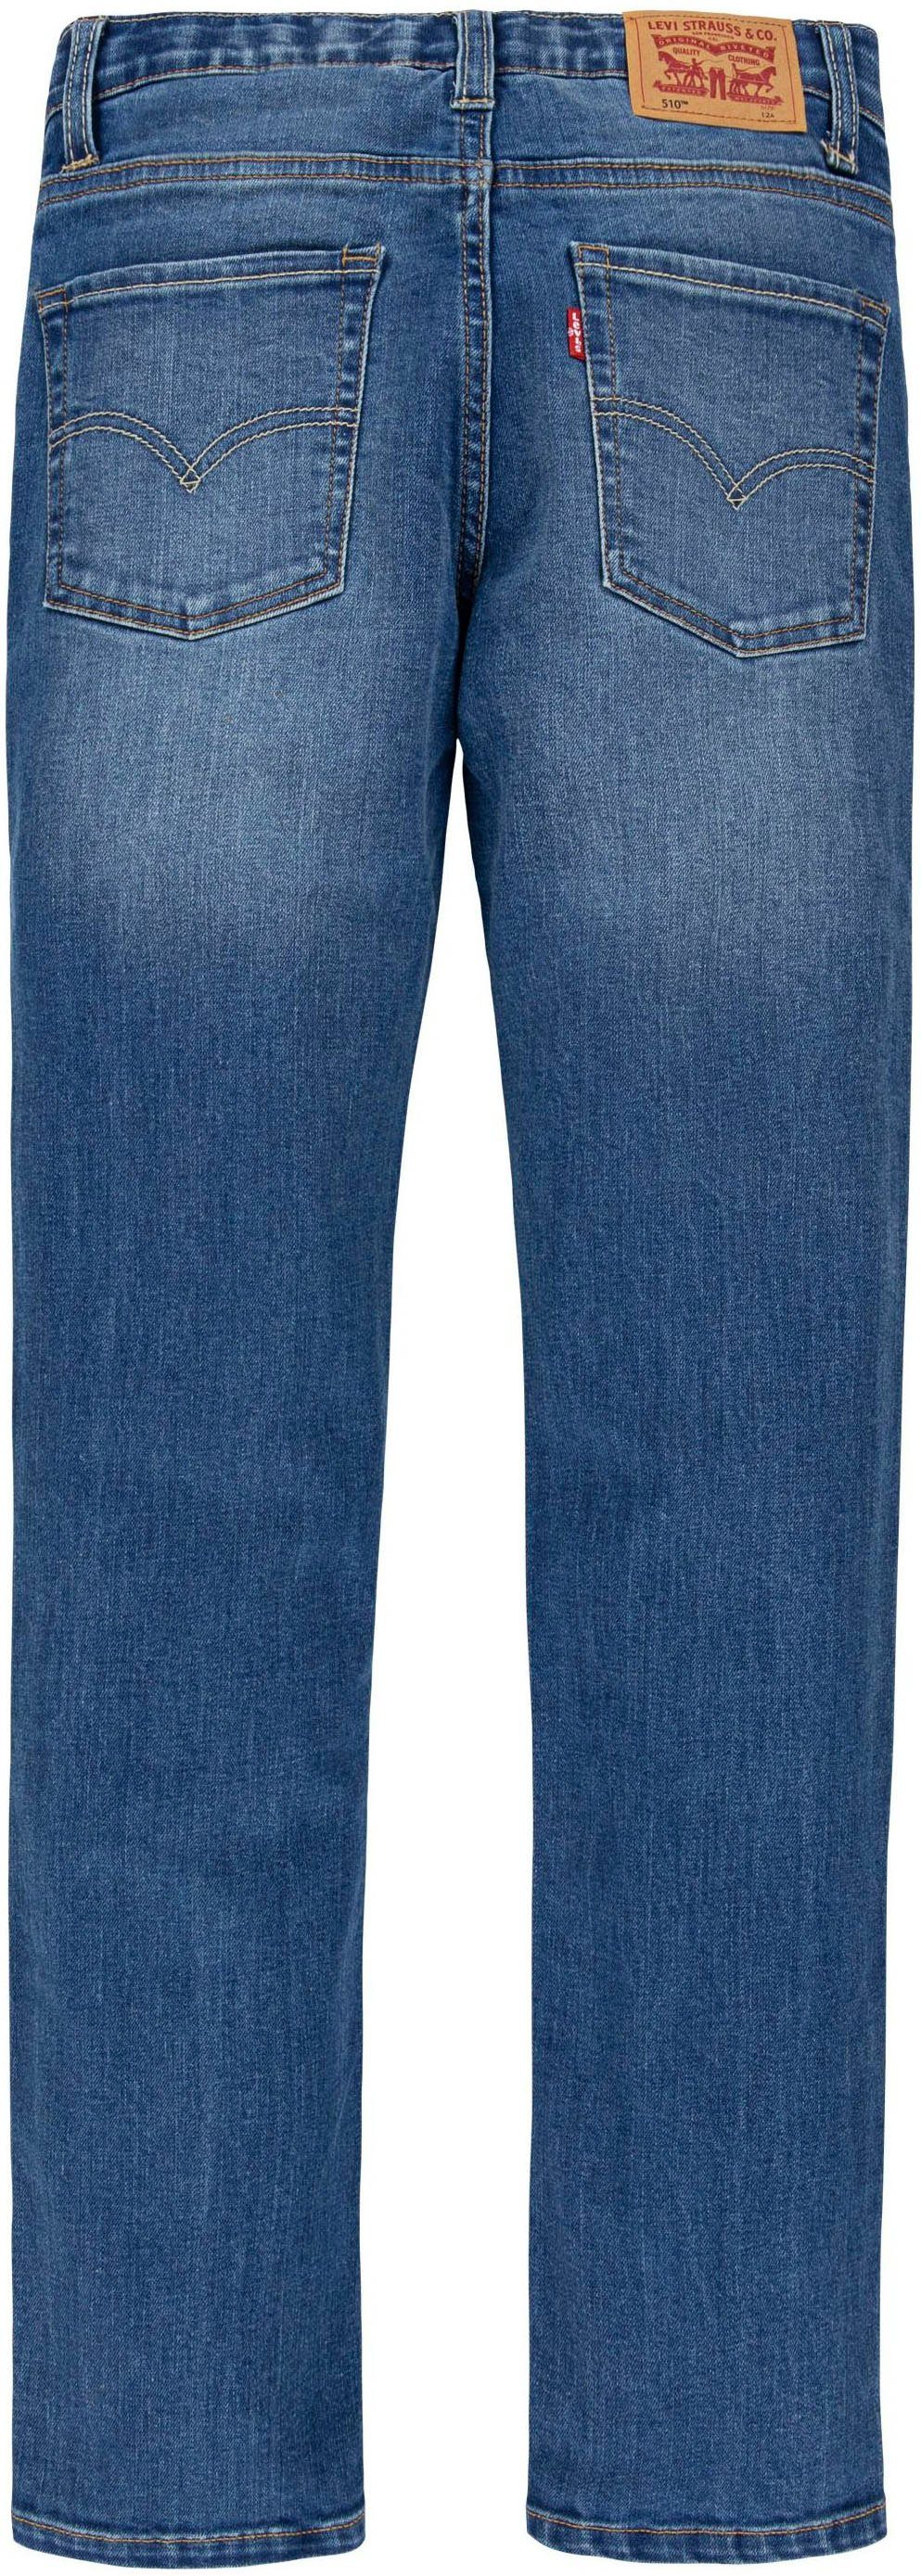 indigo mid FIT 510 Levi's® SKINNY for Kids Skinny-fit-Jeans BOYS JEANS used